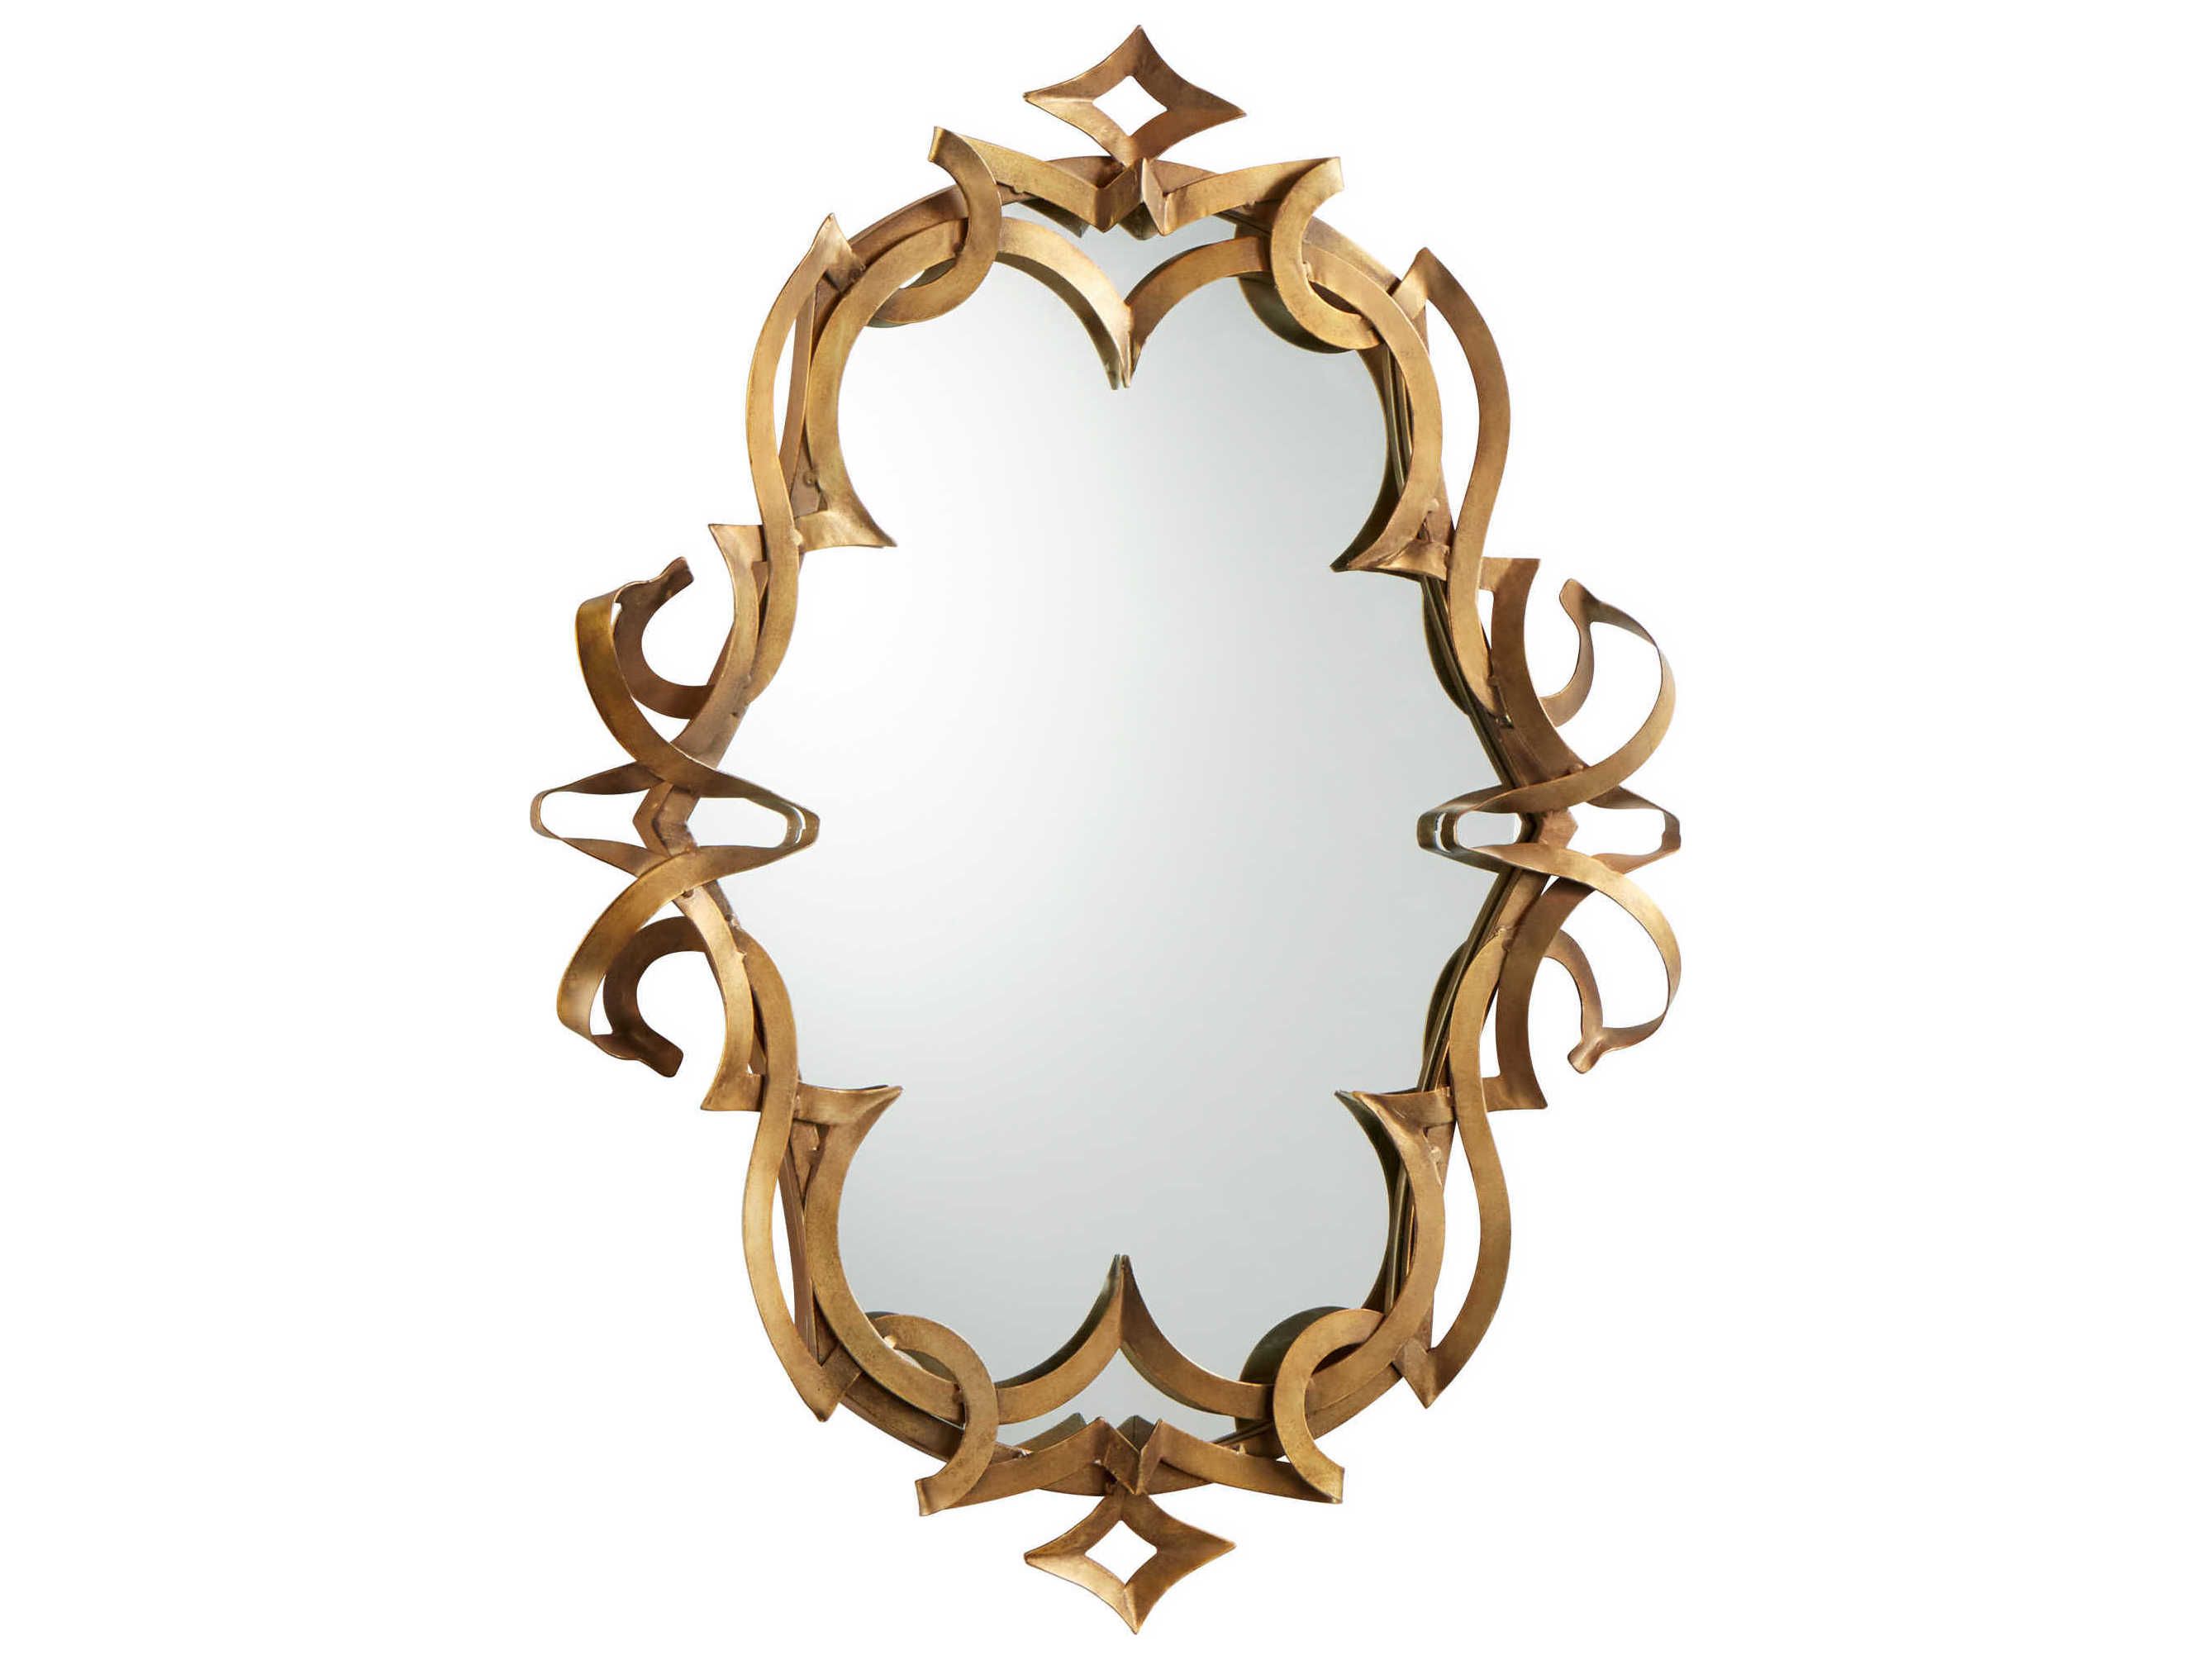 Cyan Design Gold Wall Mirror Within Alissa Traditional Wall Mirrors (View 5 of 20)